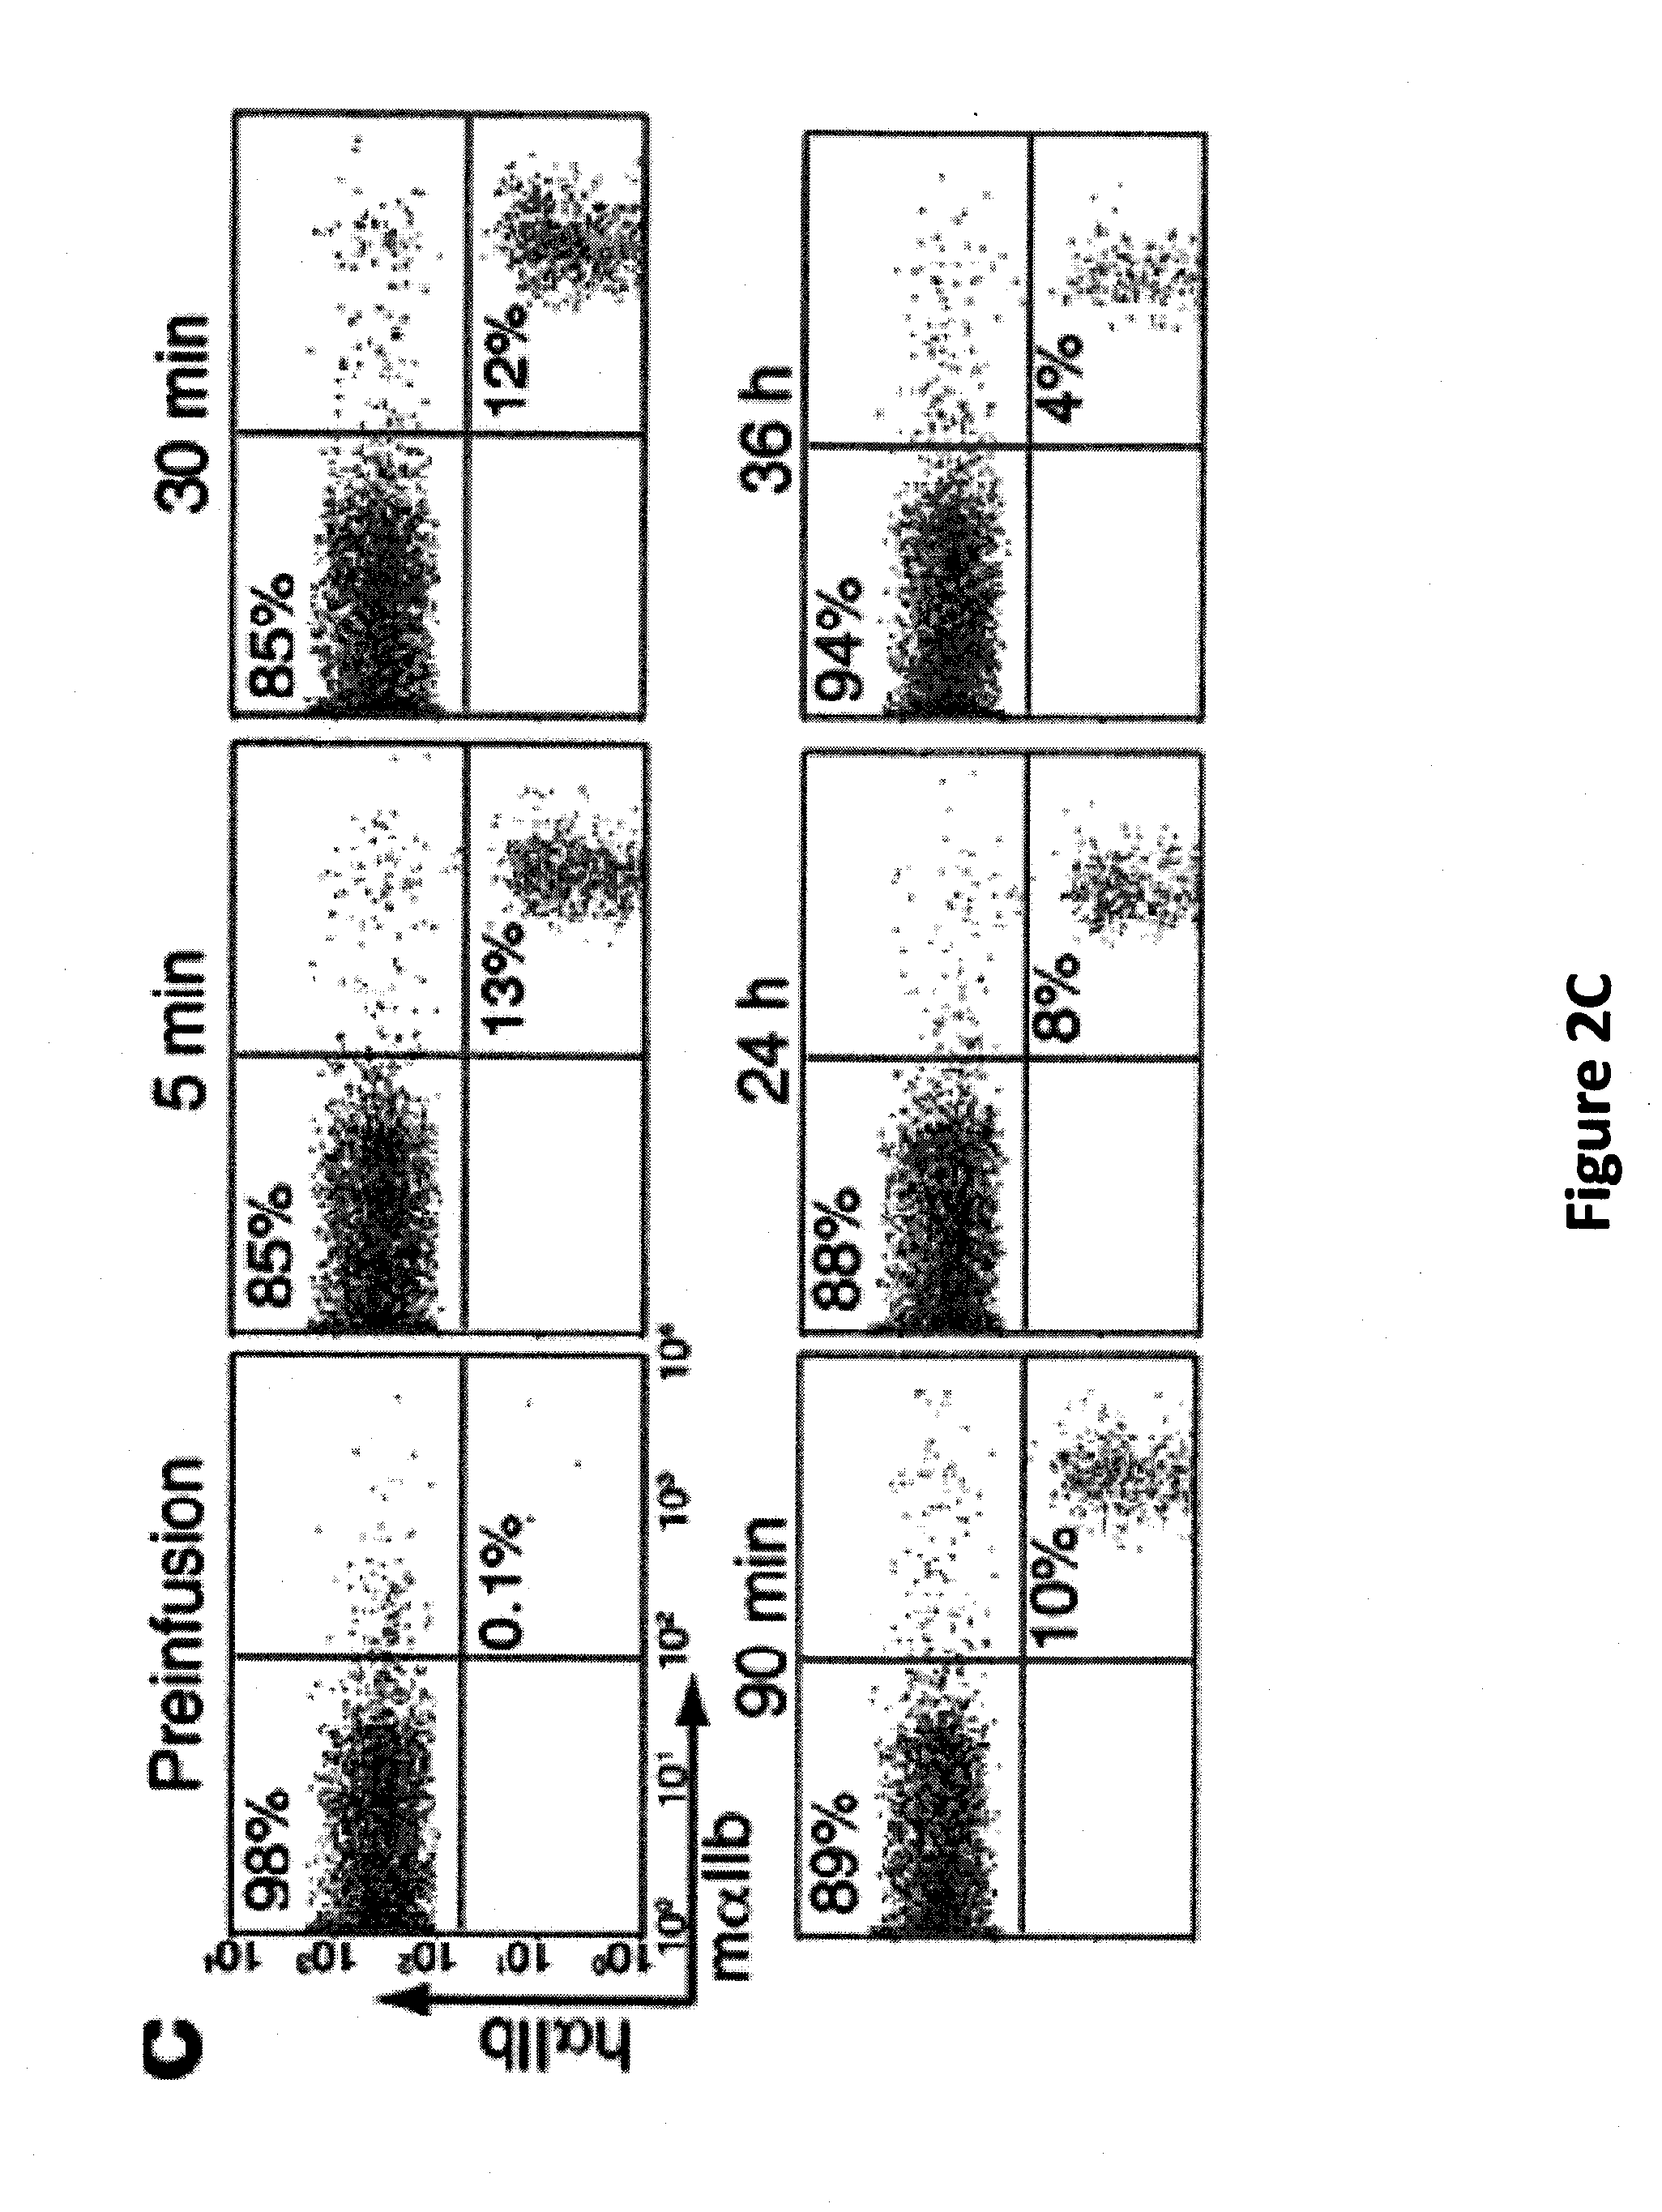 Compositions and Methods for the Generation of Platelets and Methods of Use Thereof